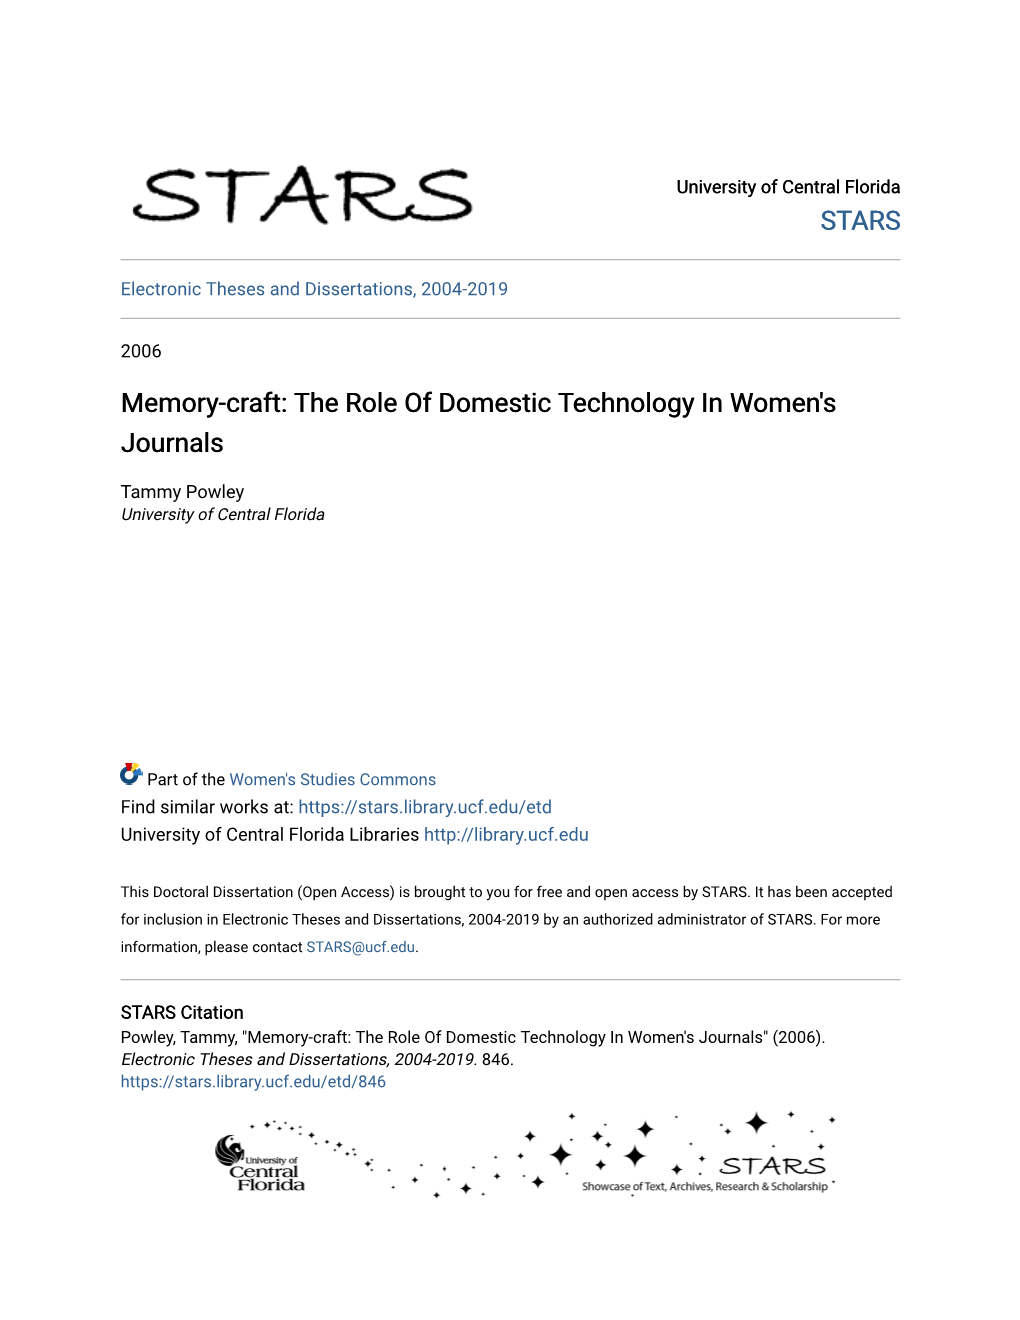 Memory-Craft: the Role of Domestic Technology in Women's Journals